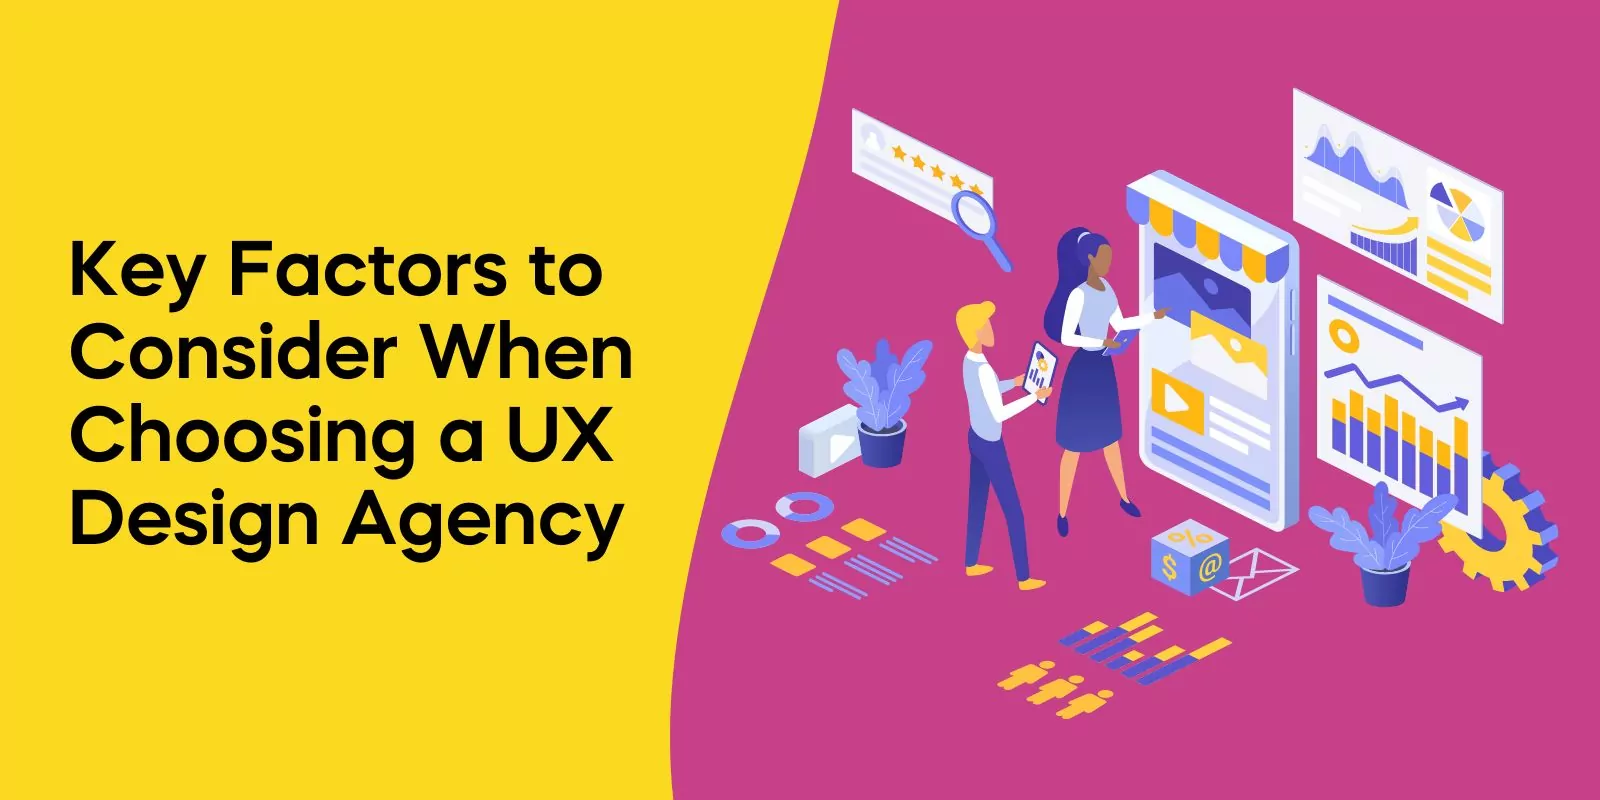 Key Factors to Consider When Choosing a UX Design Agency